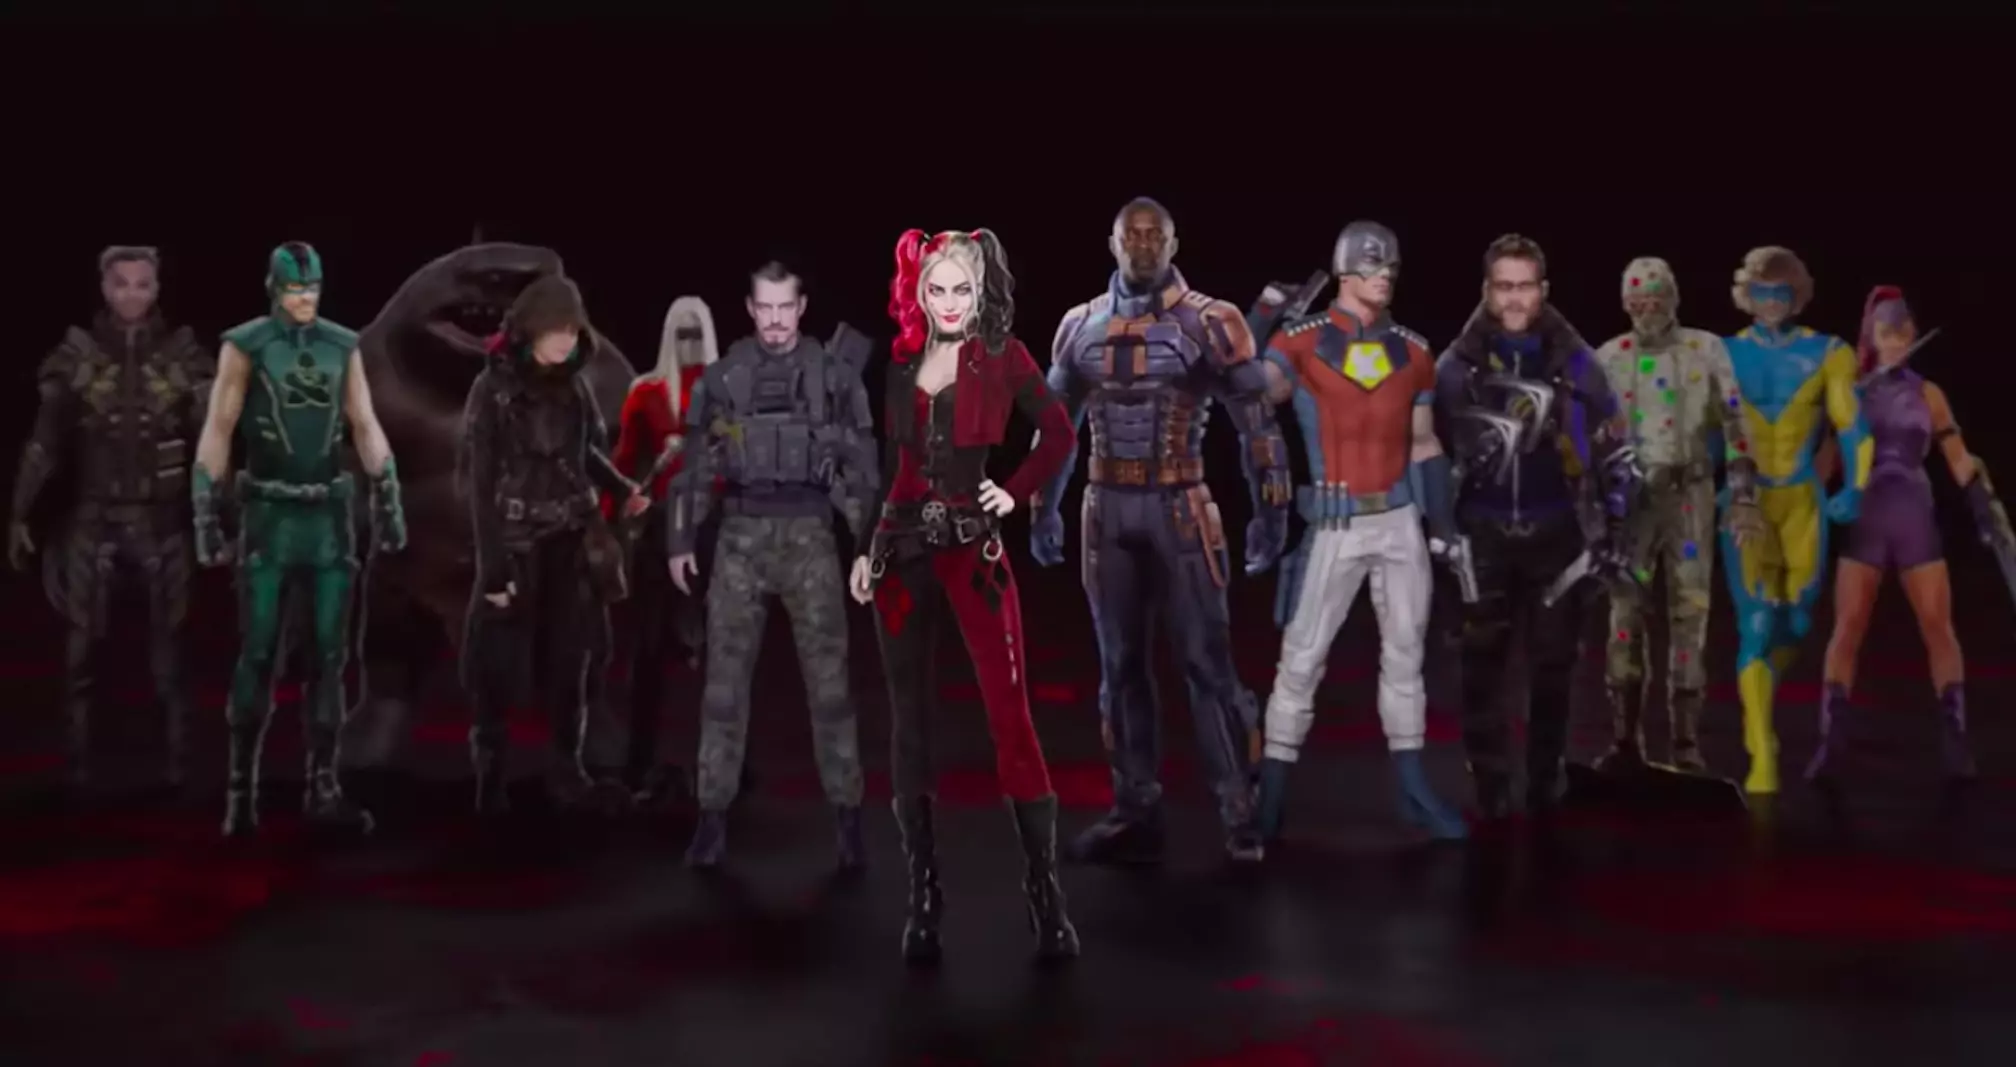 Meet 'The Suicide Squad's Full Cast in Its First Teaser